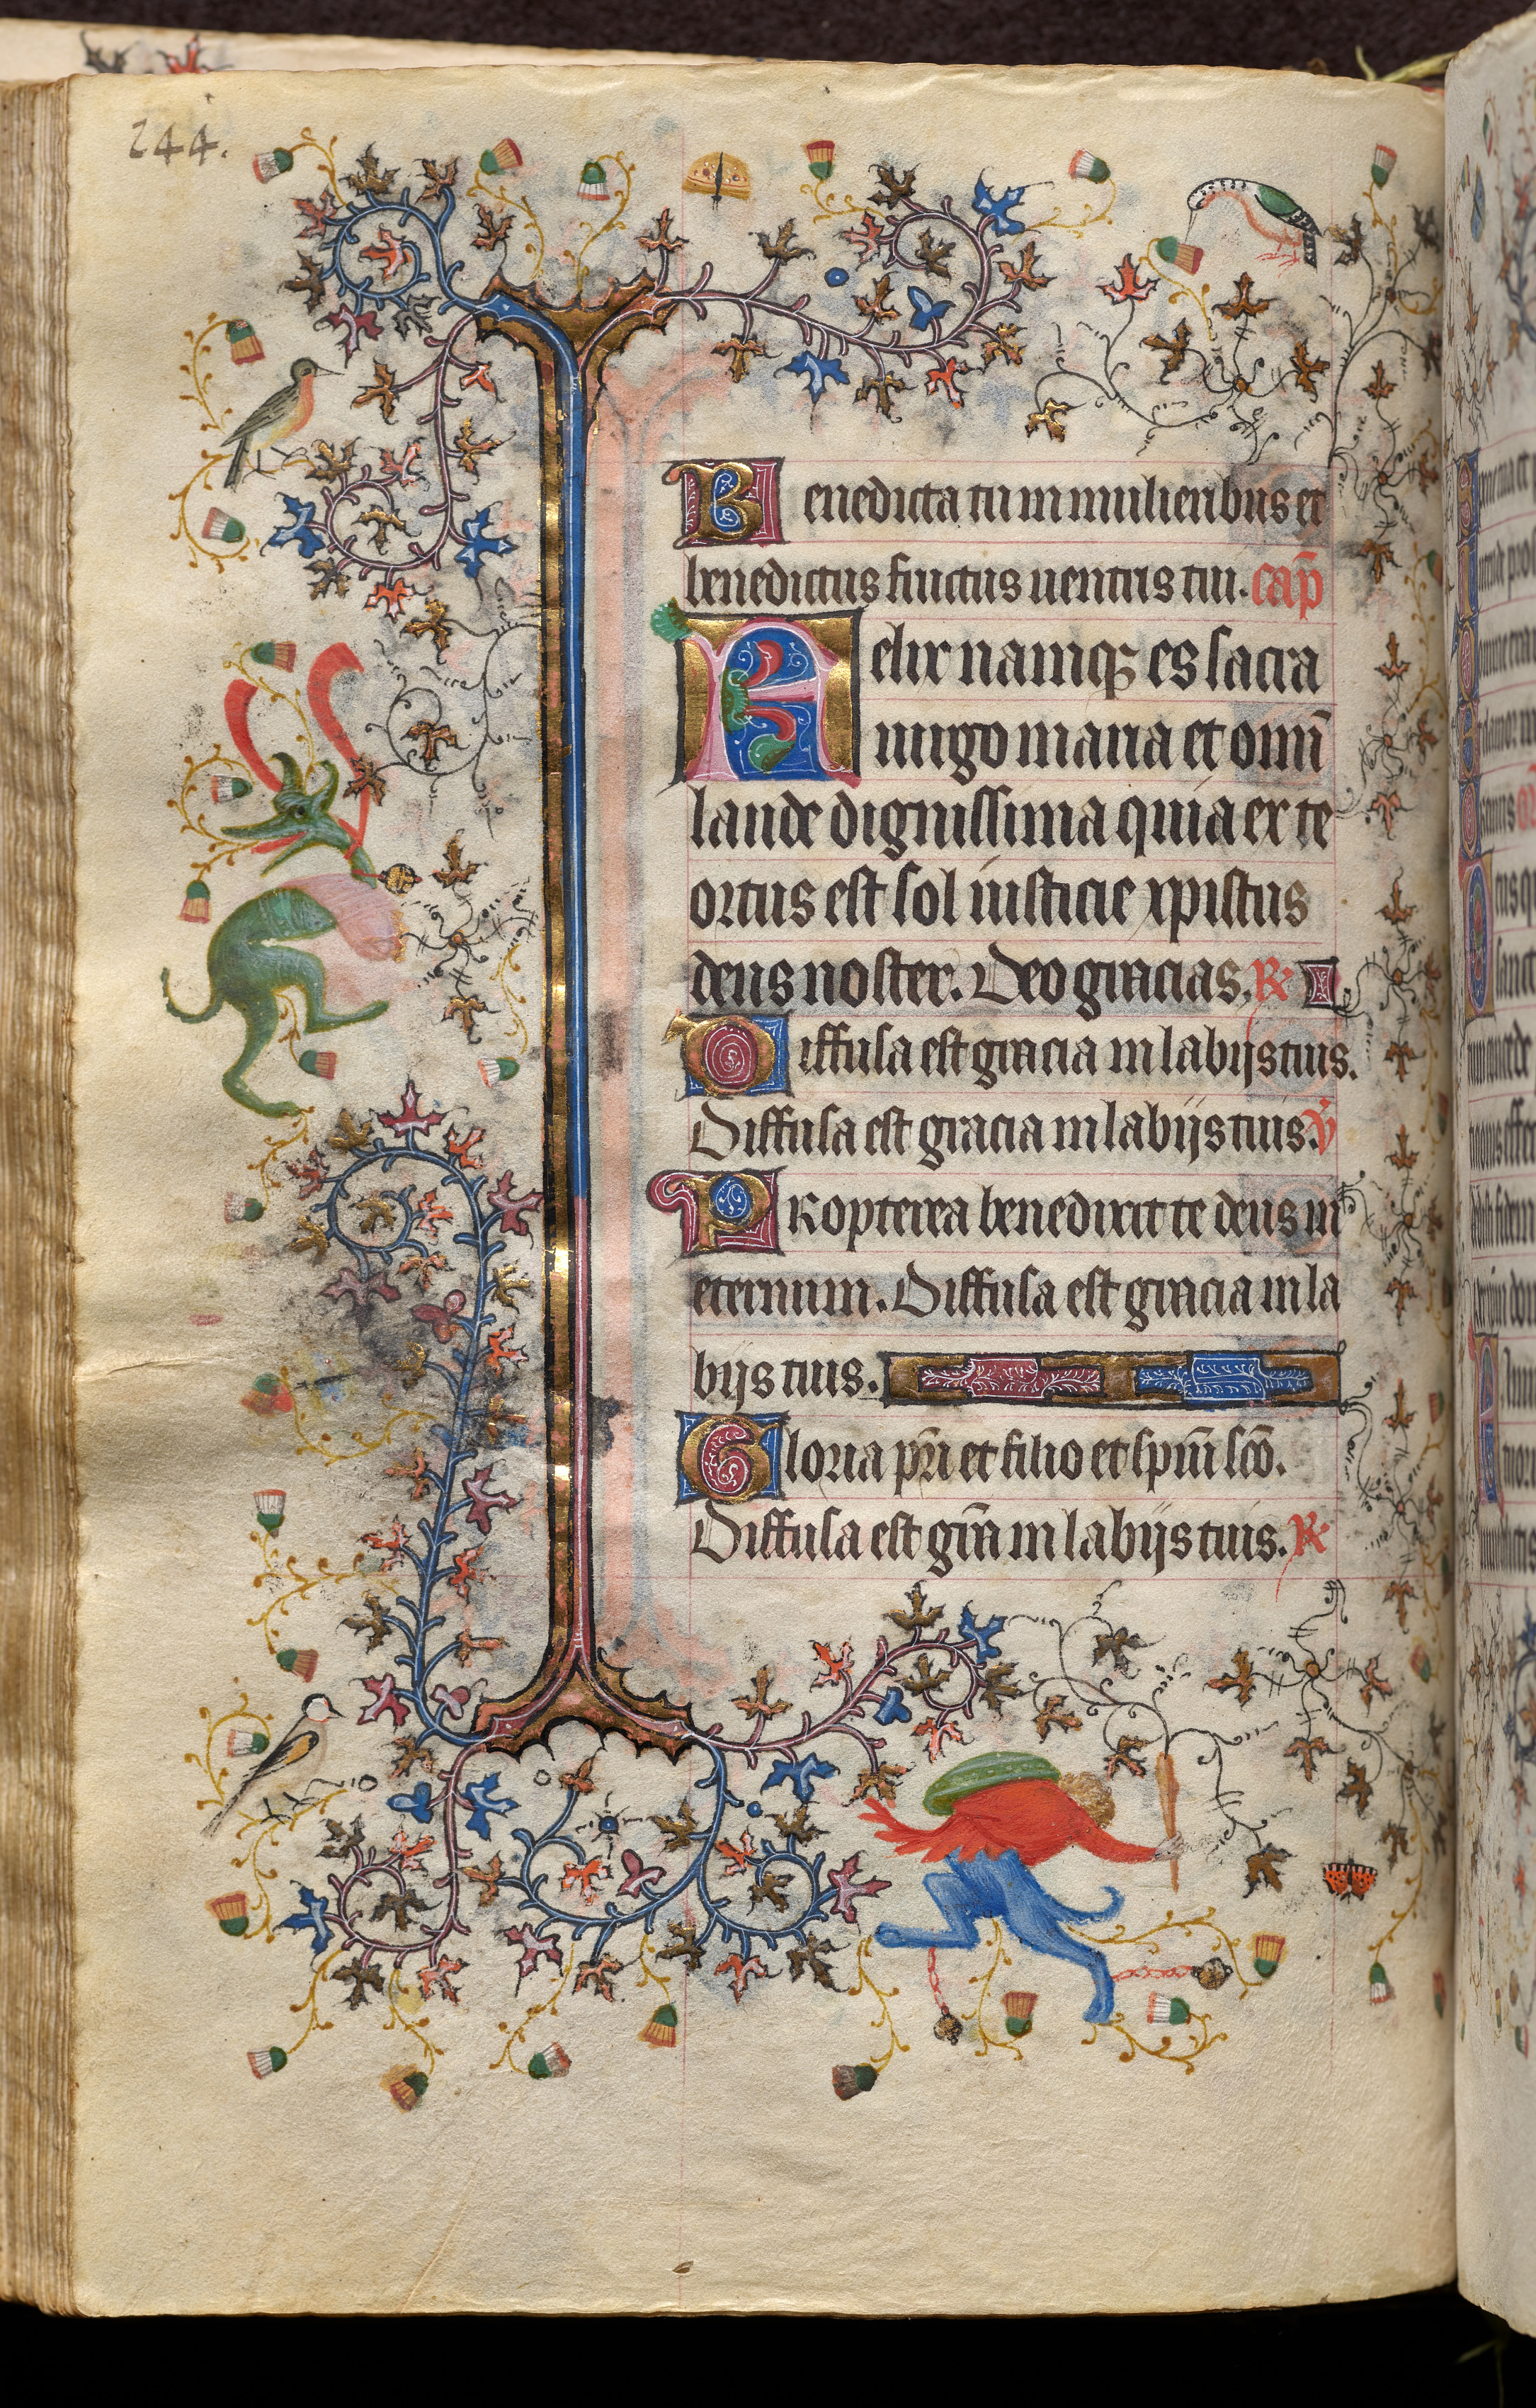 Hours of Charles the Noble, King of Navarre (1361-1425): fol. 72v, Text